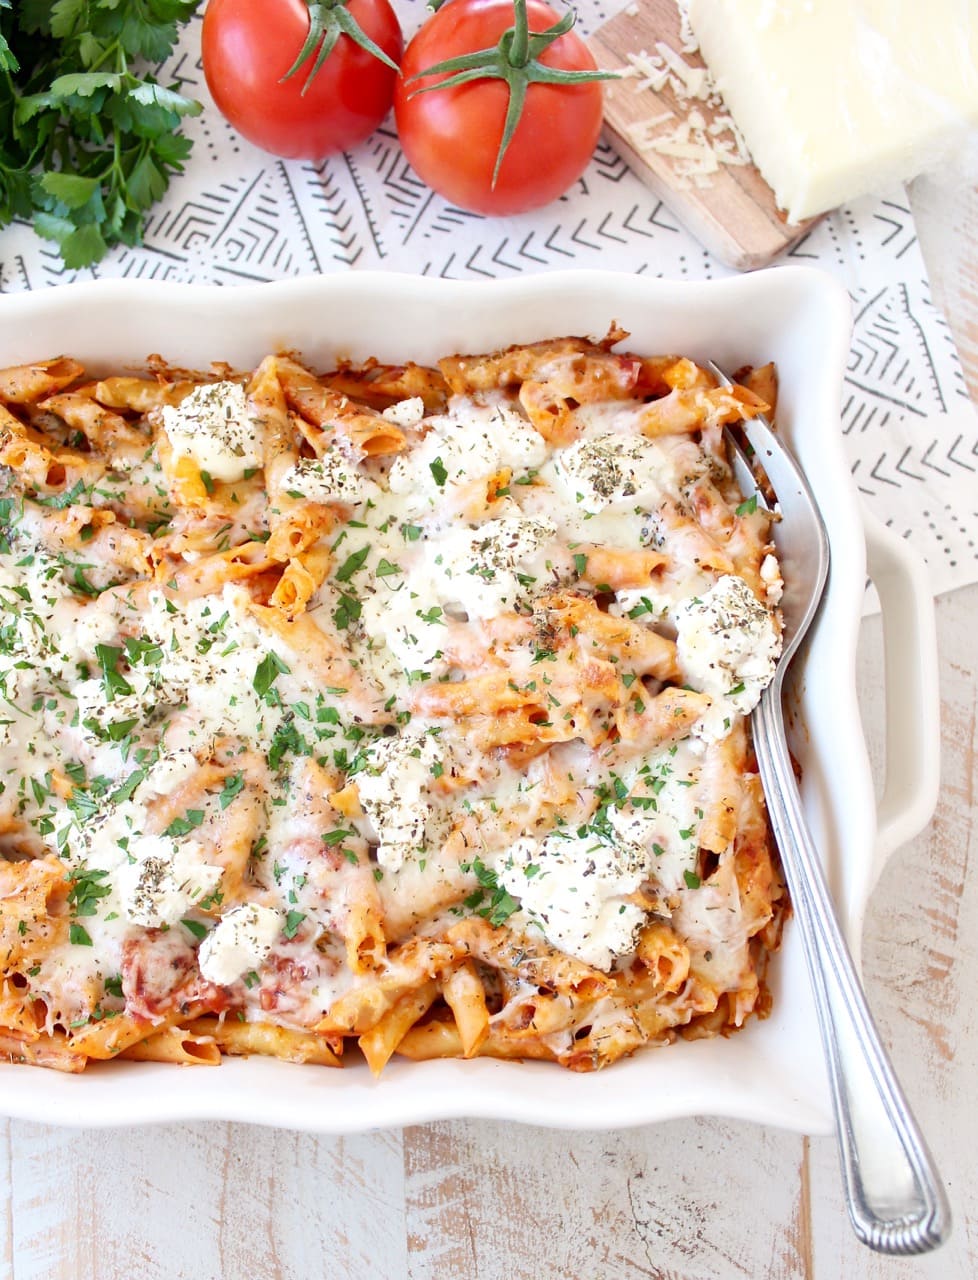 baked pasta in casserole dish with large serving fork